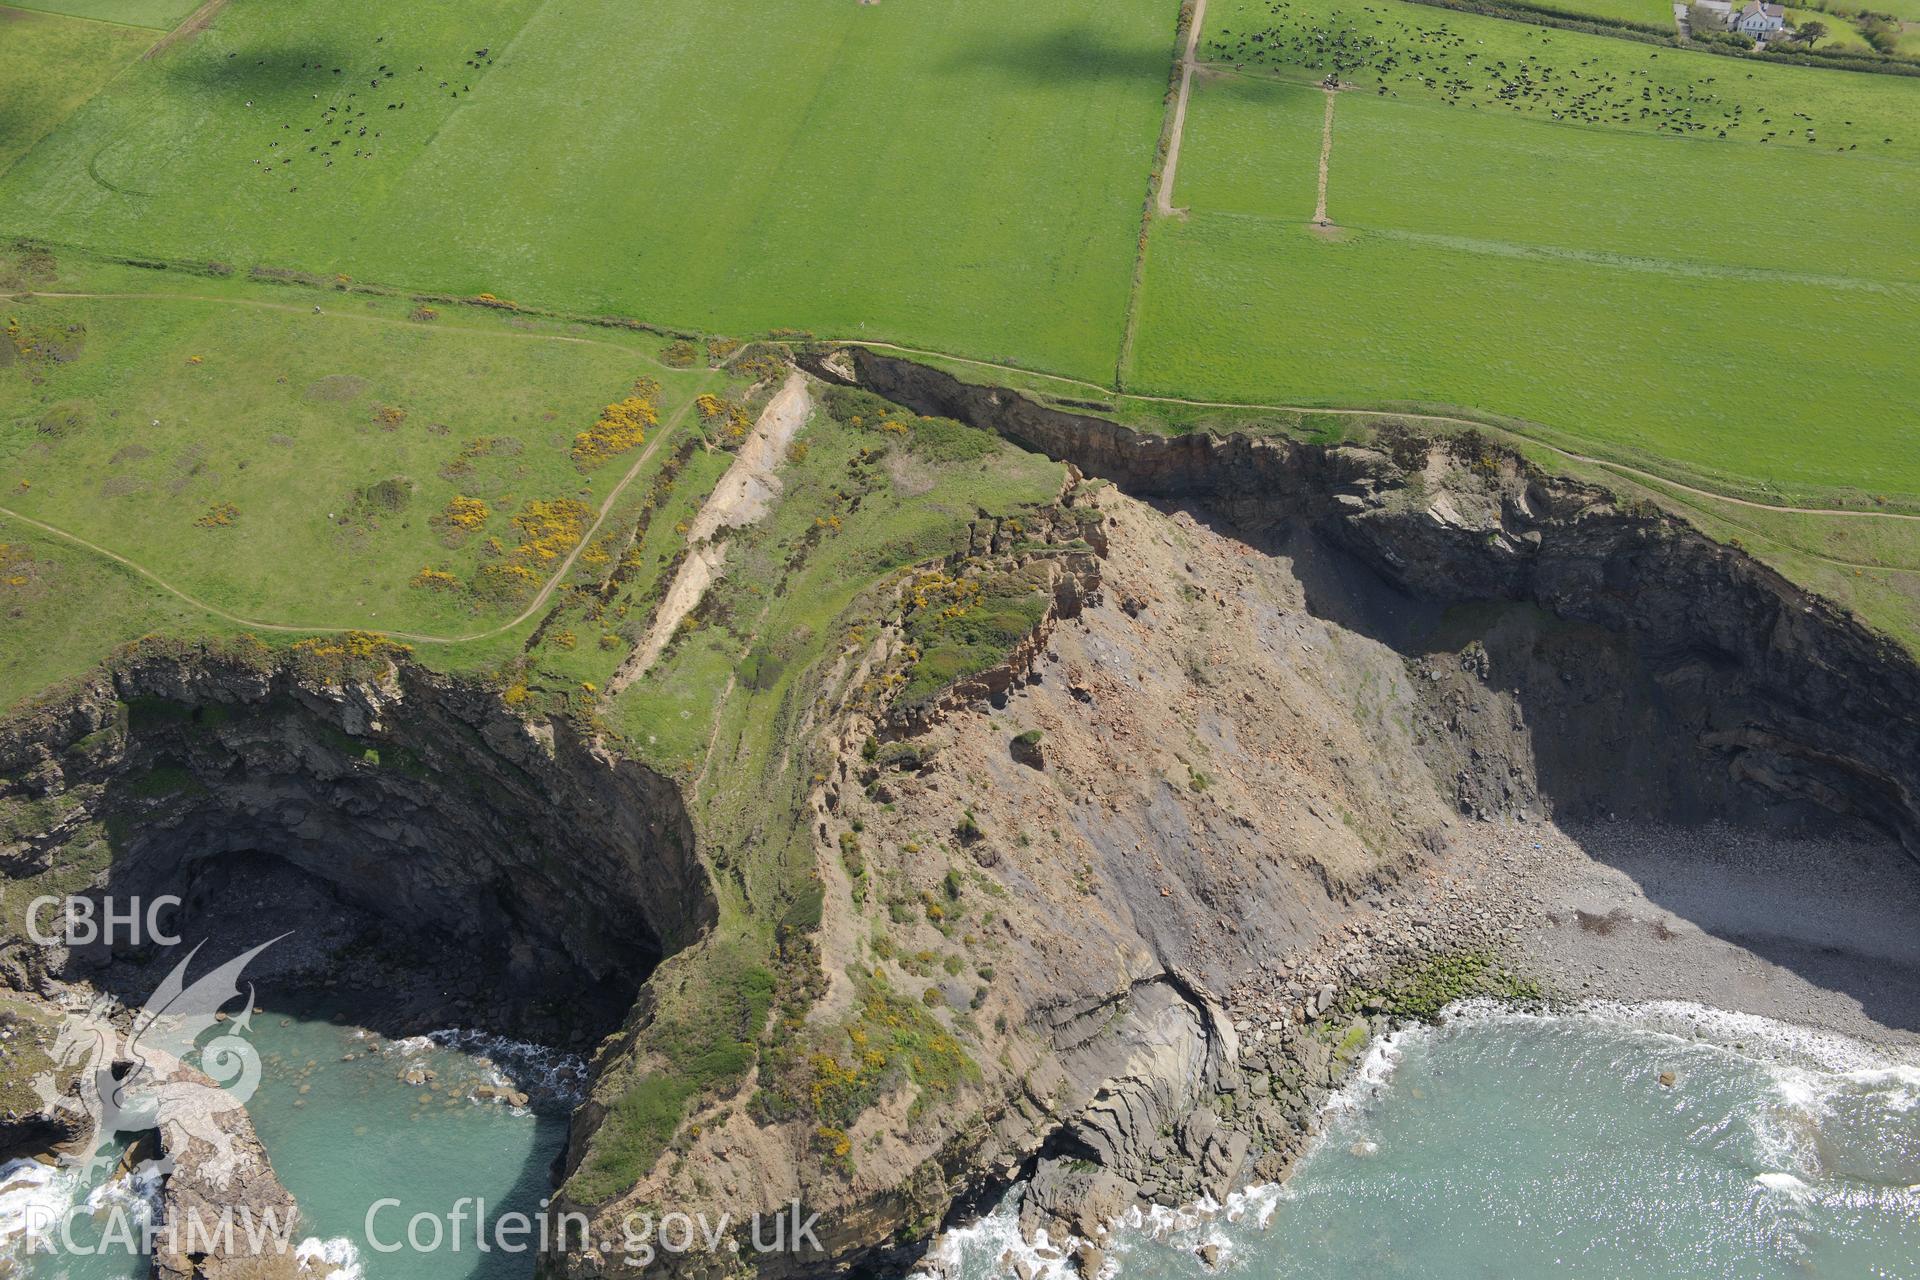 Black Point Rath promontory fort, near Haverford West. Oblique aerial photograph taken during the Royal Commission's programme of archaeological aerial reconnaissance by Toby Driver on 13th May 2015.